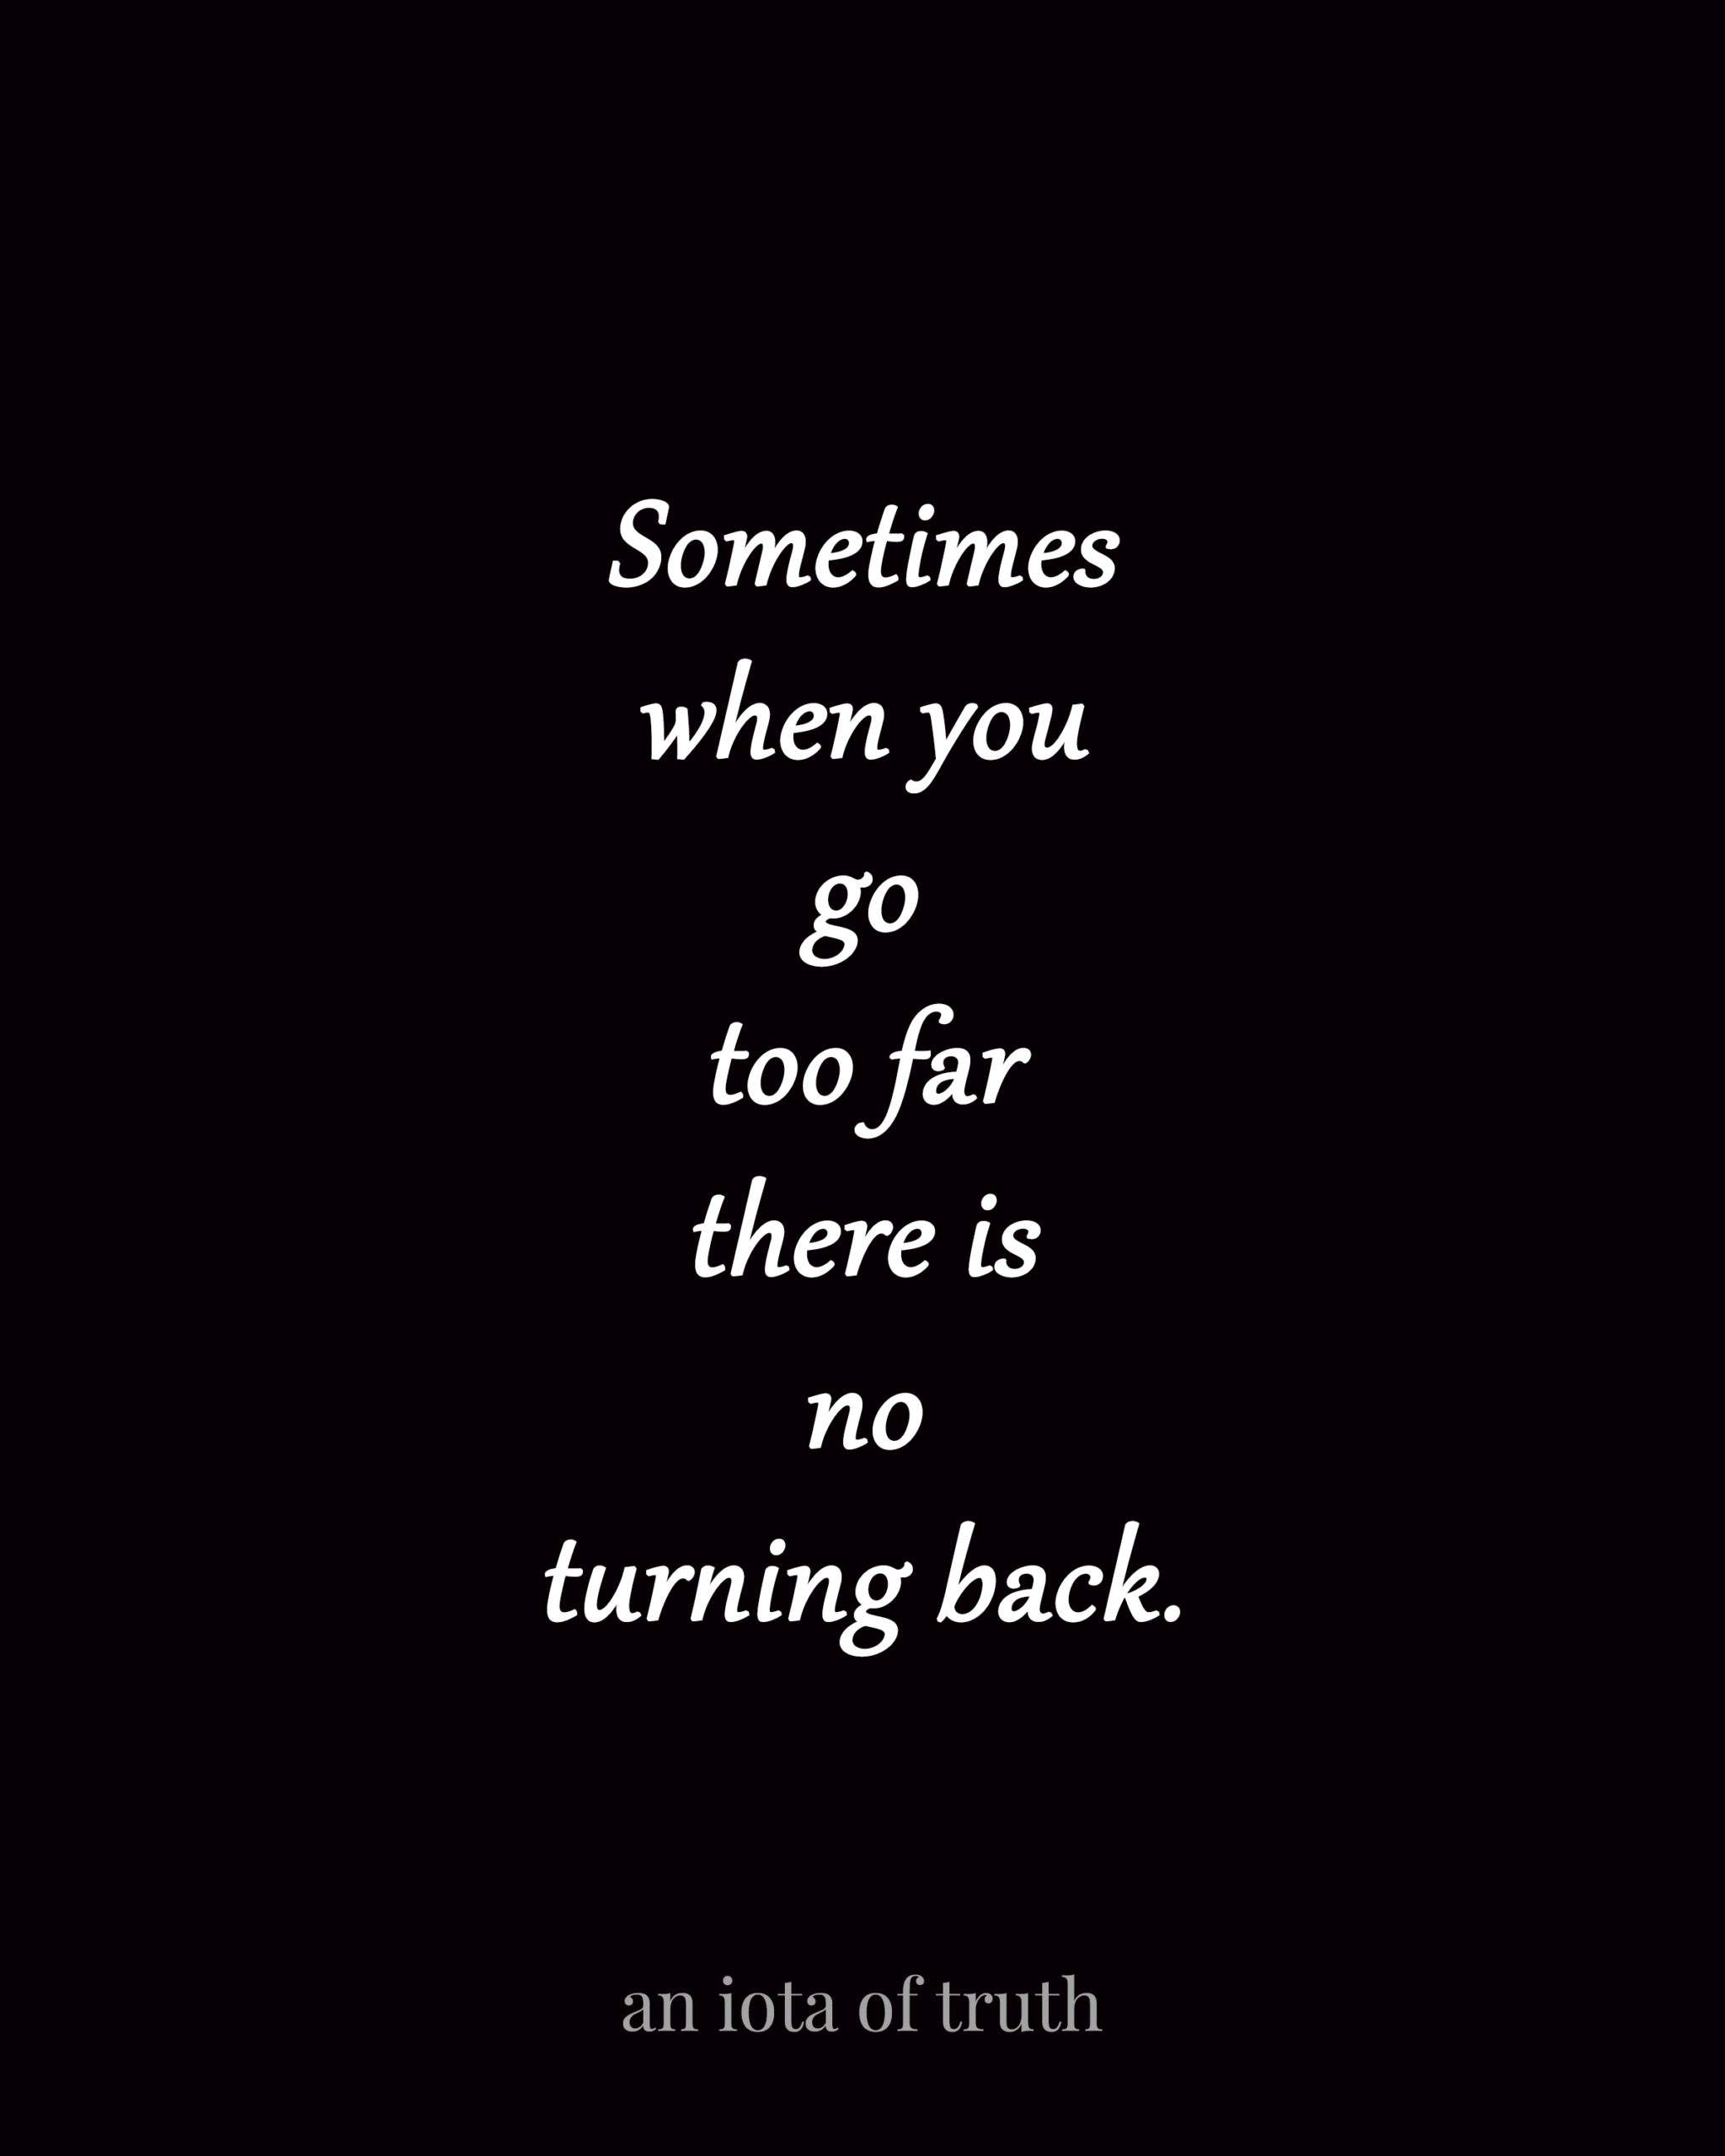 Sometimes when you go too far there is no turning back.